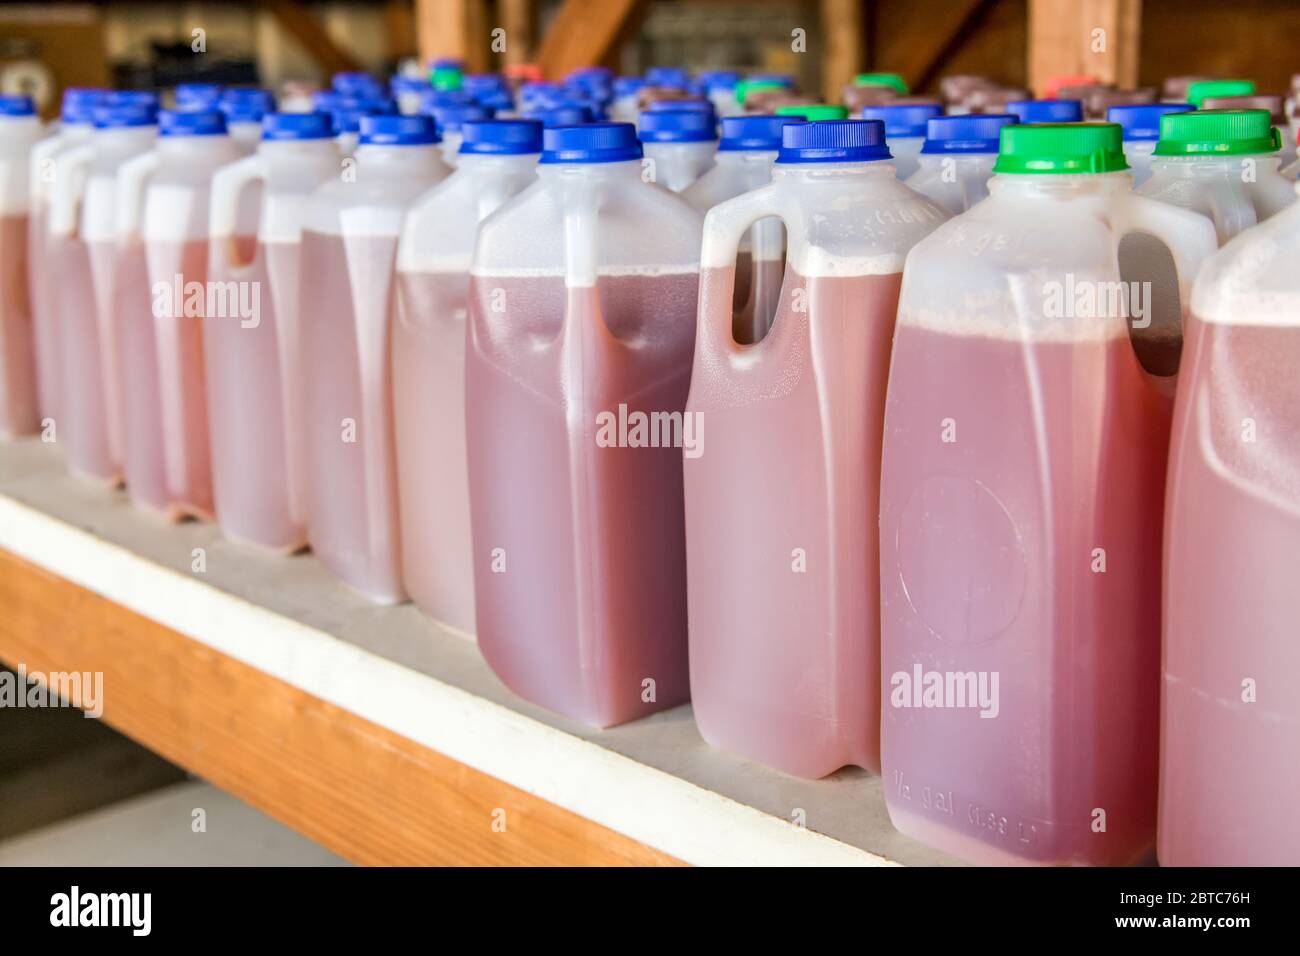 Bottles of freshly made cider on a shelf, near Hood River, Oregon, USA.  This cider is made from a combination of apples, grapes and pears.  Extra hea Stock Photo